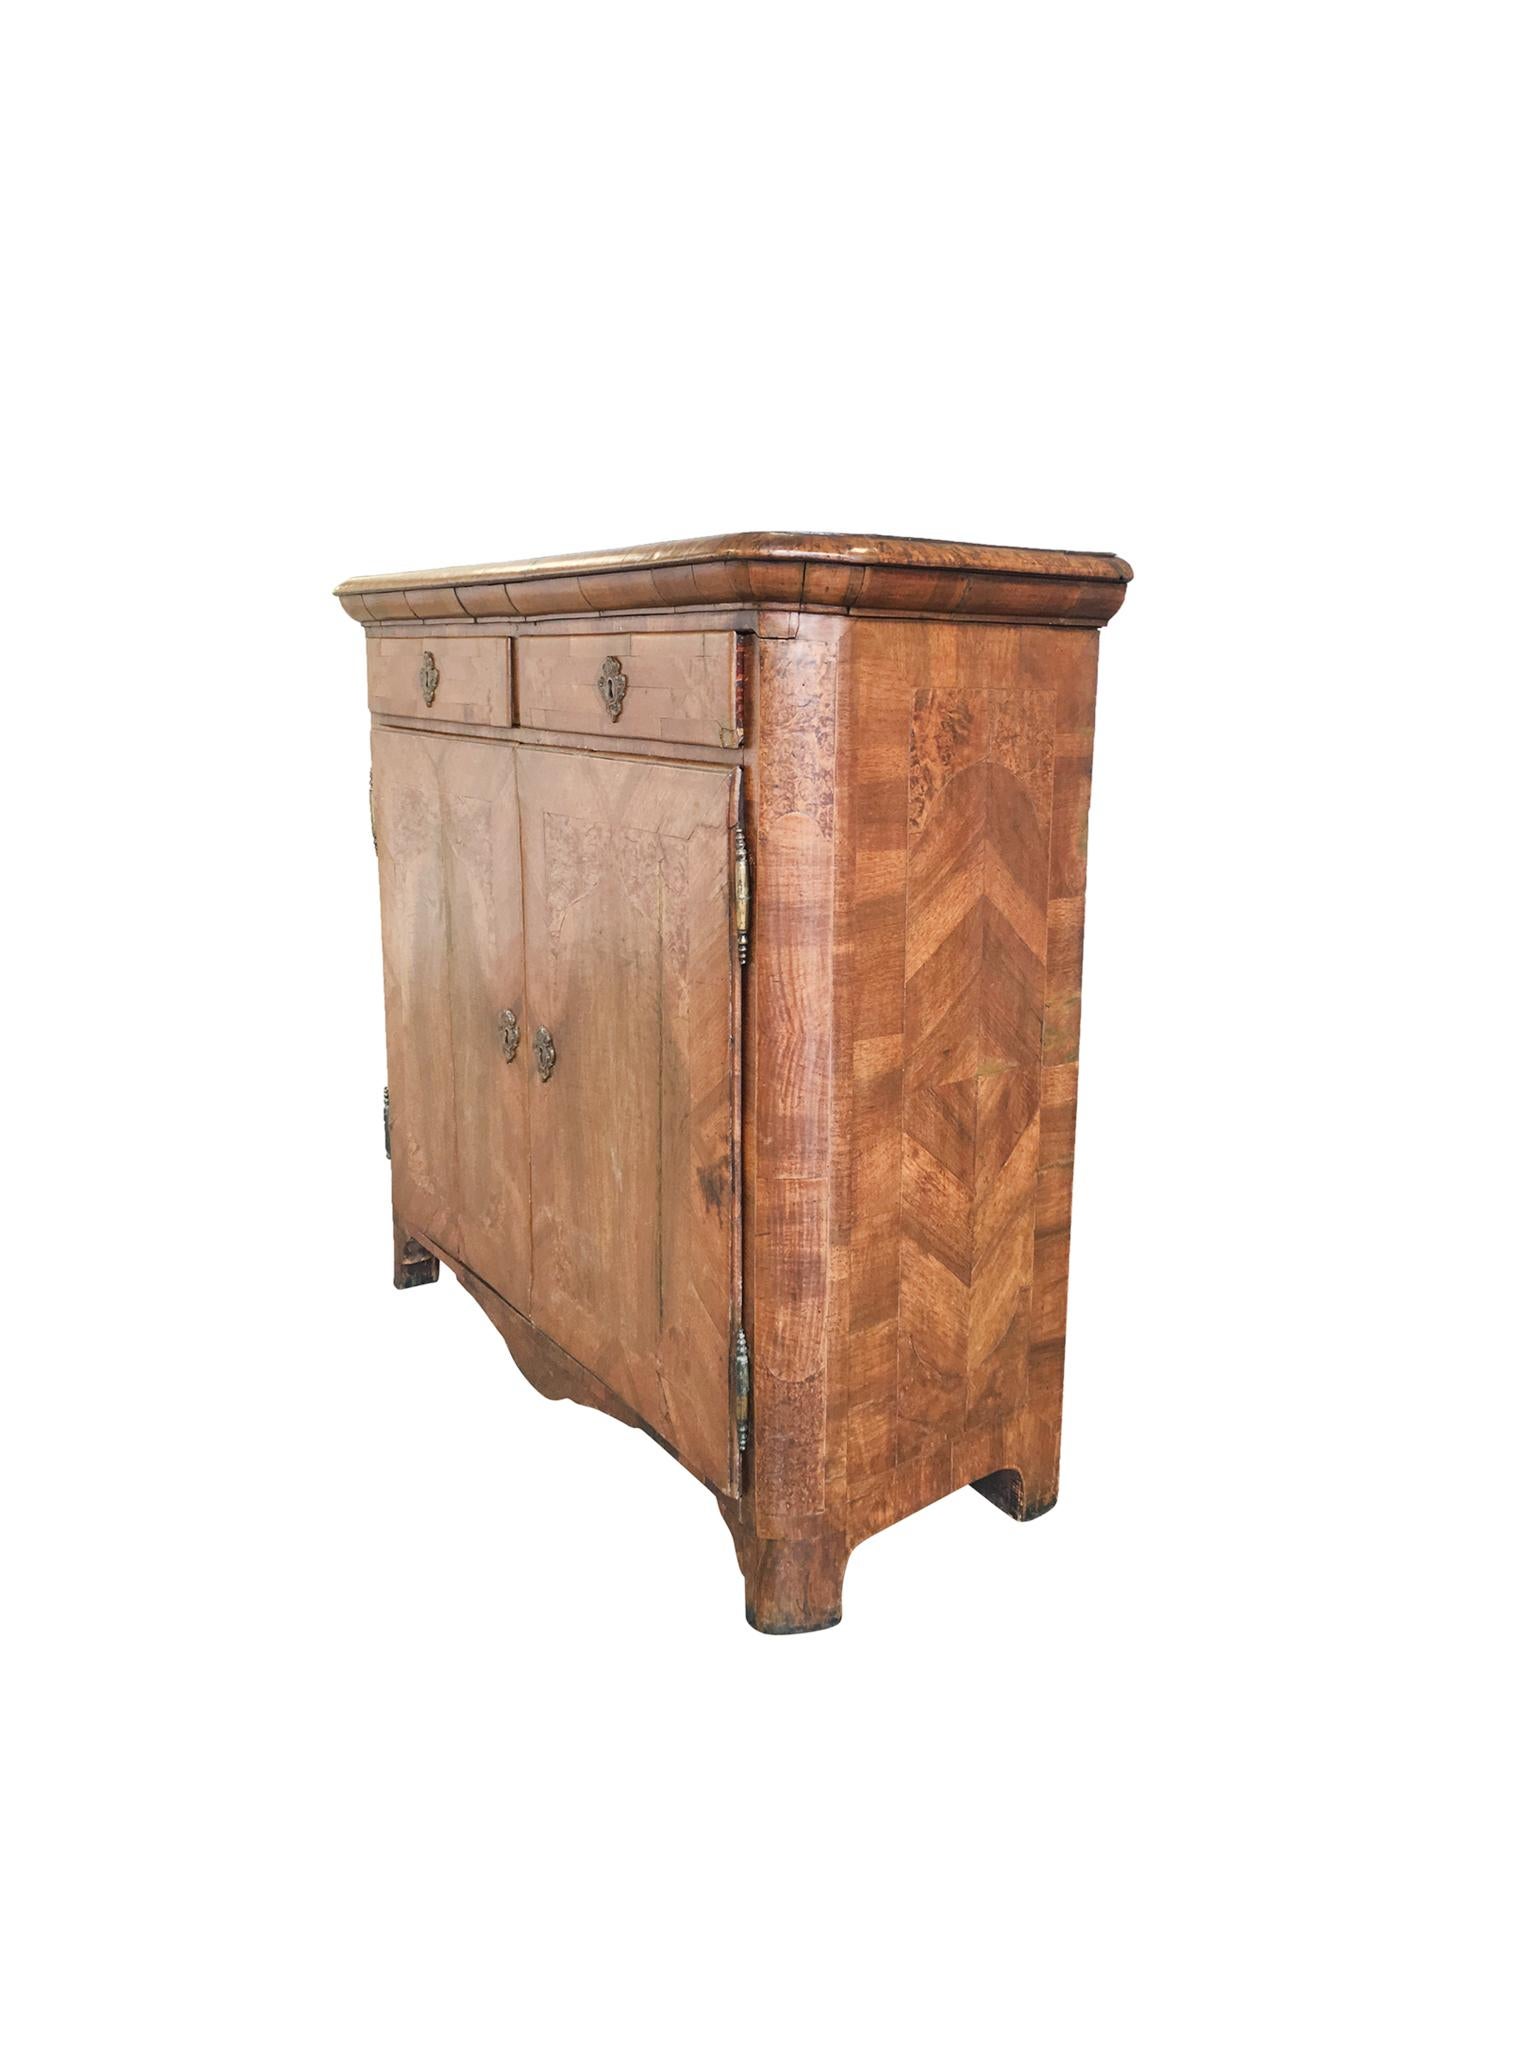 Parquetry 18th Century Walnut and Olive Burl Italian Cabinet